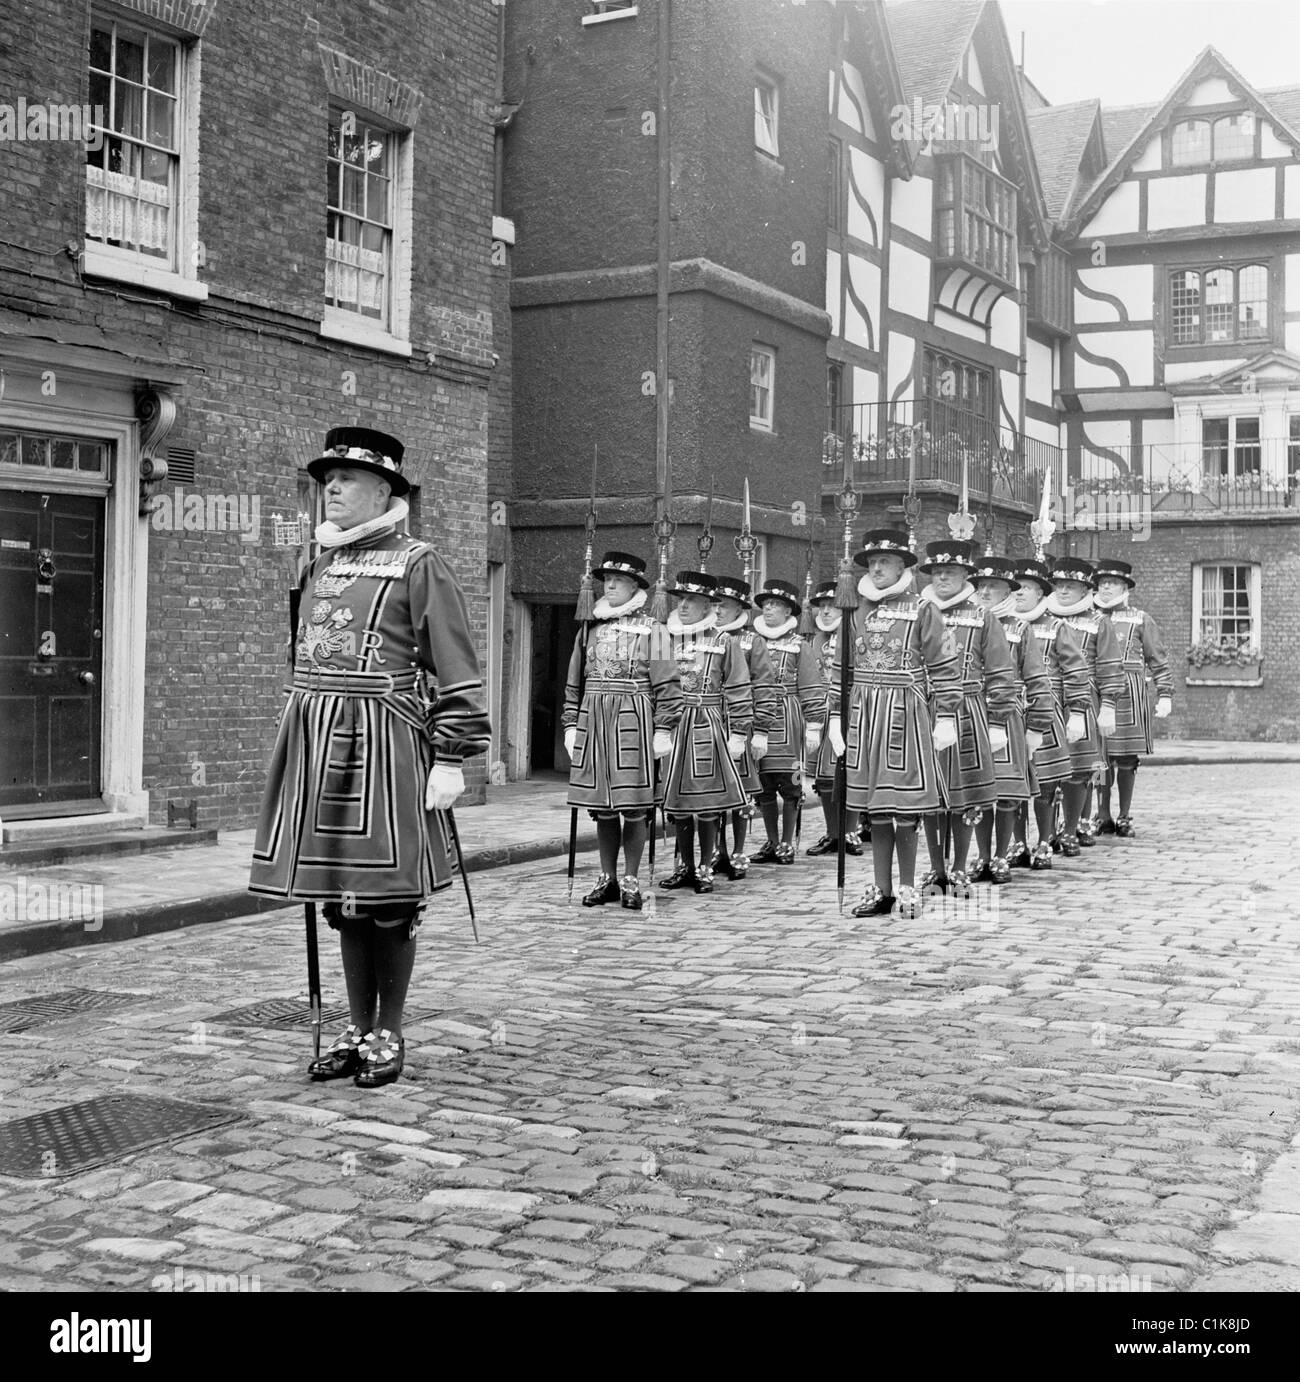 1950s, the Chief warden of the Tower of London leads a parade of yeoman or wardens of the English Royal guard, Tower Green, London, England. Stock Photo